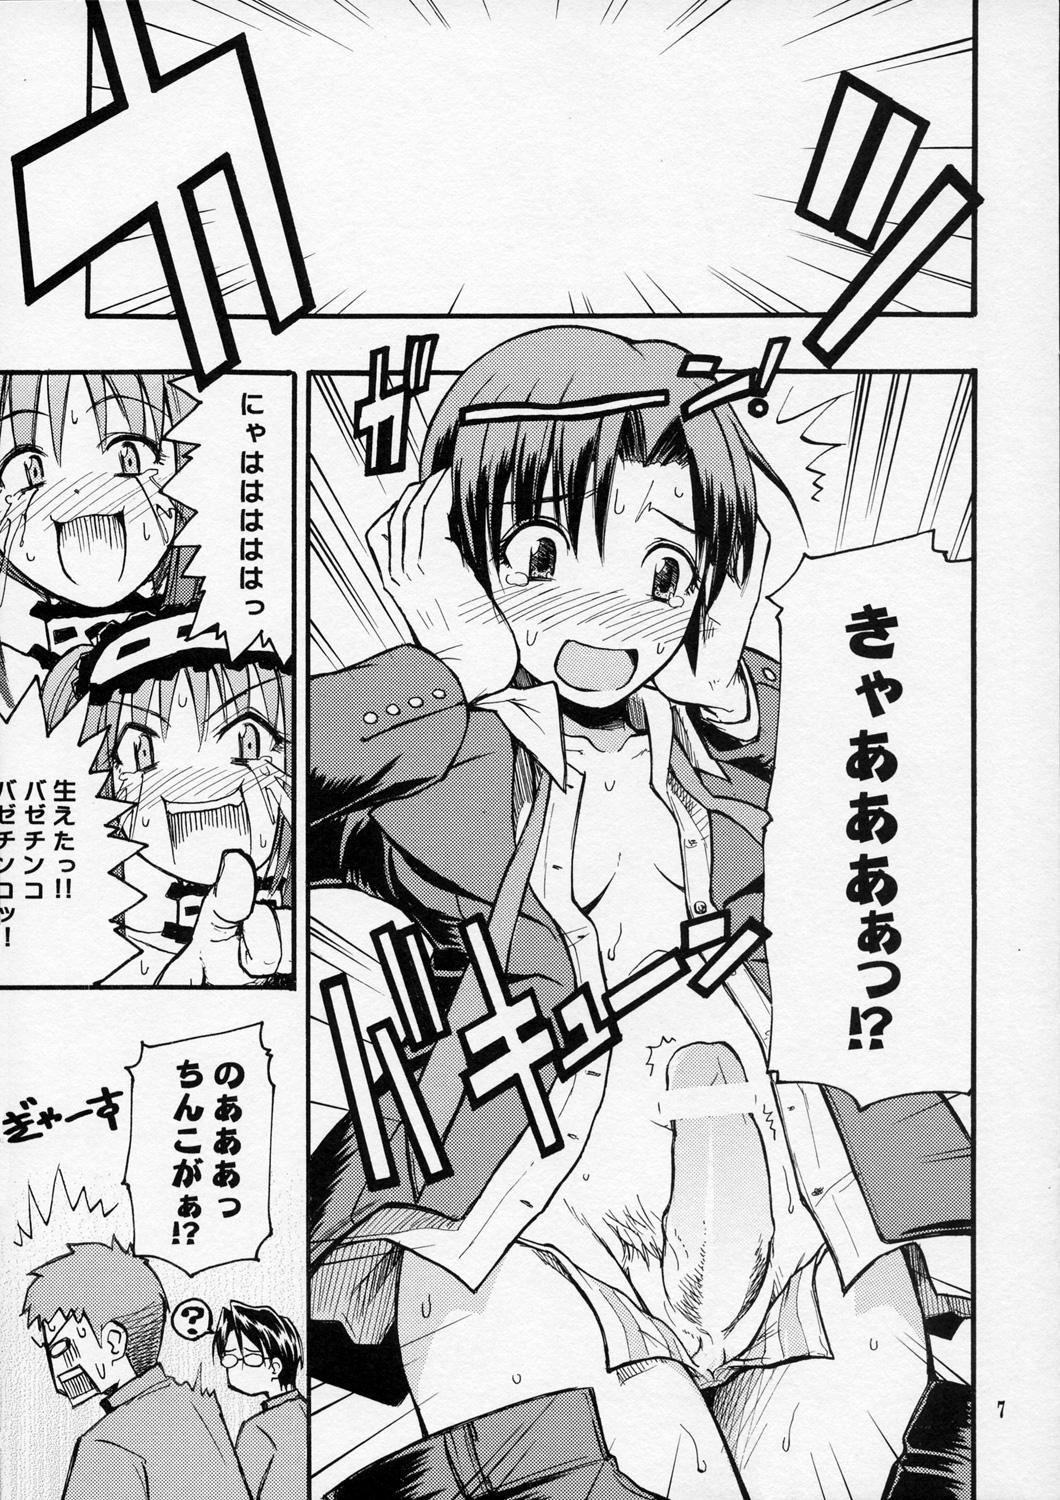 Babysitter Itsukame Baby - Fate hollow ataraxia Gostosas - Page 6